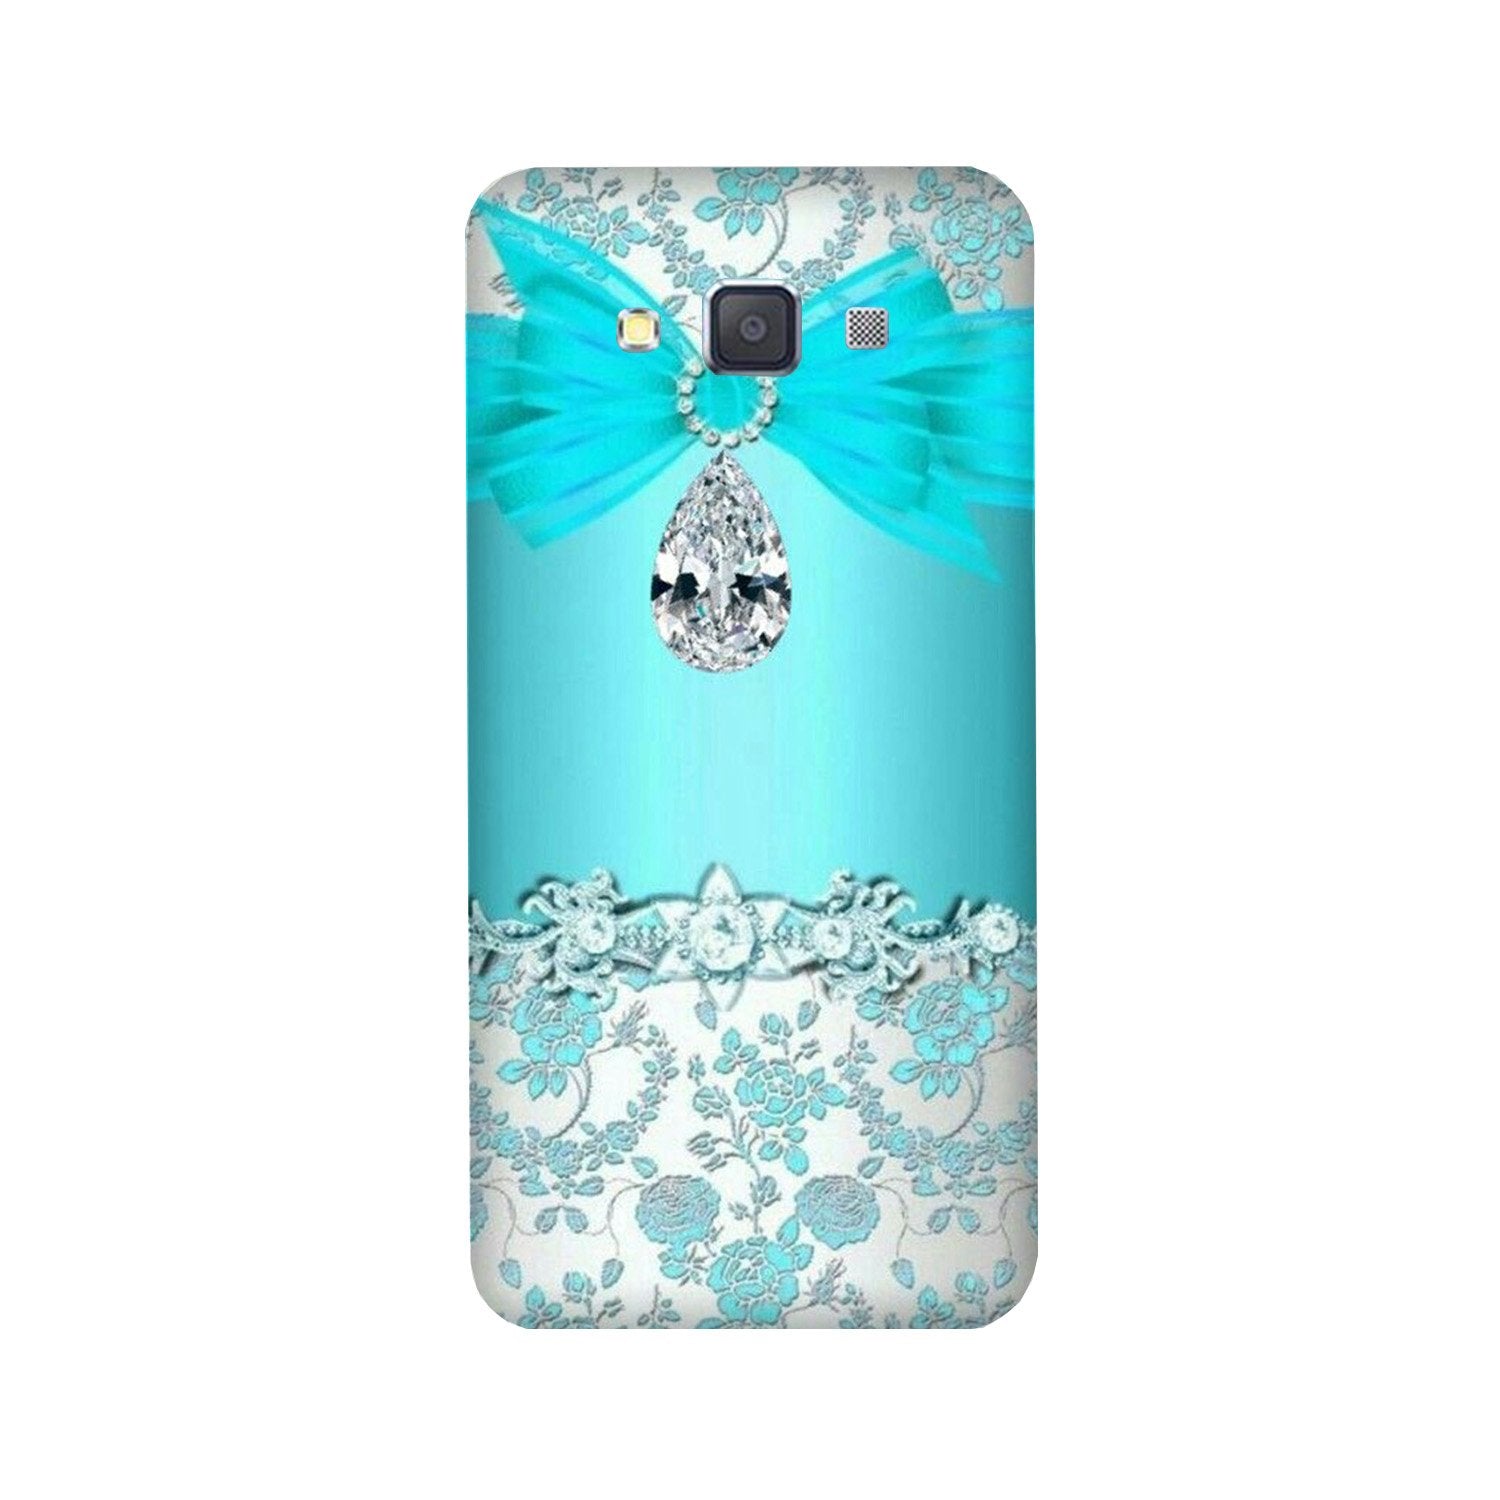 Shinny Blue Background Case for Galaxy ON5/ON5 Pro